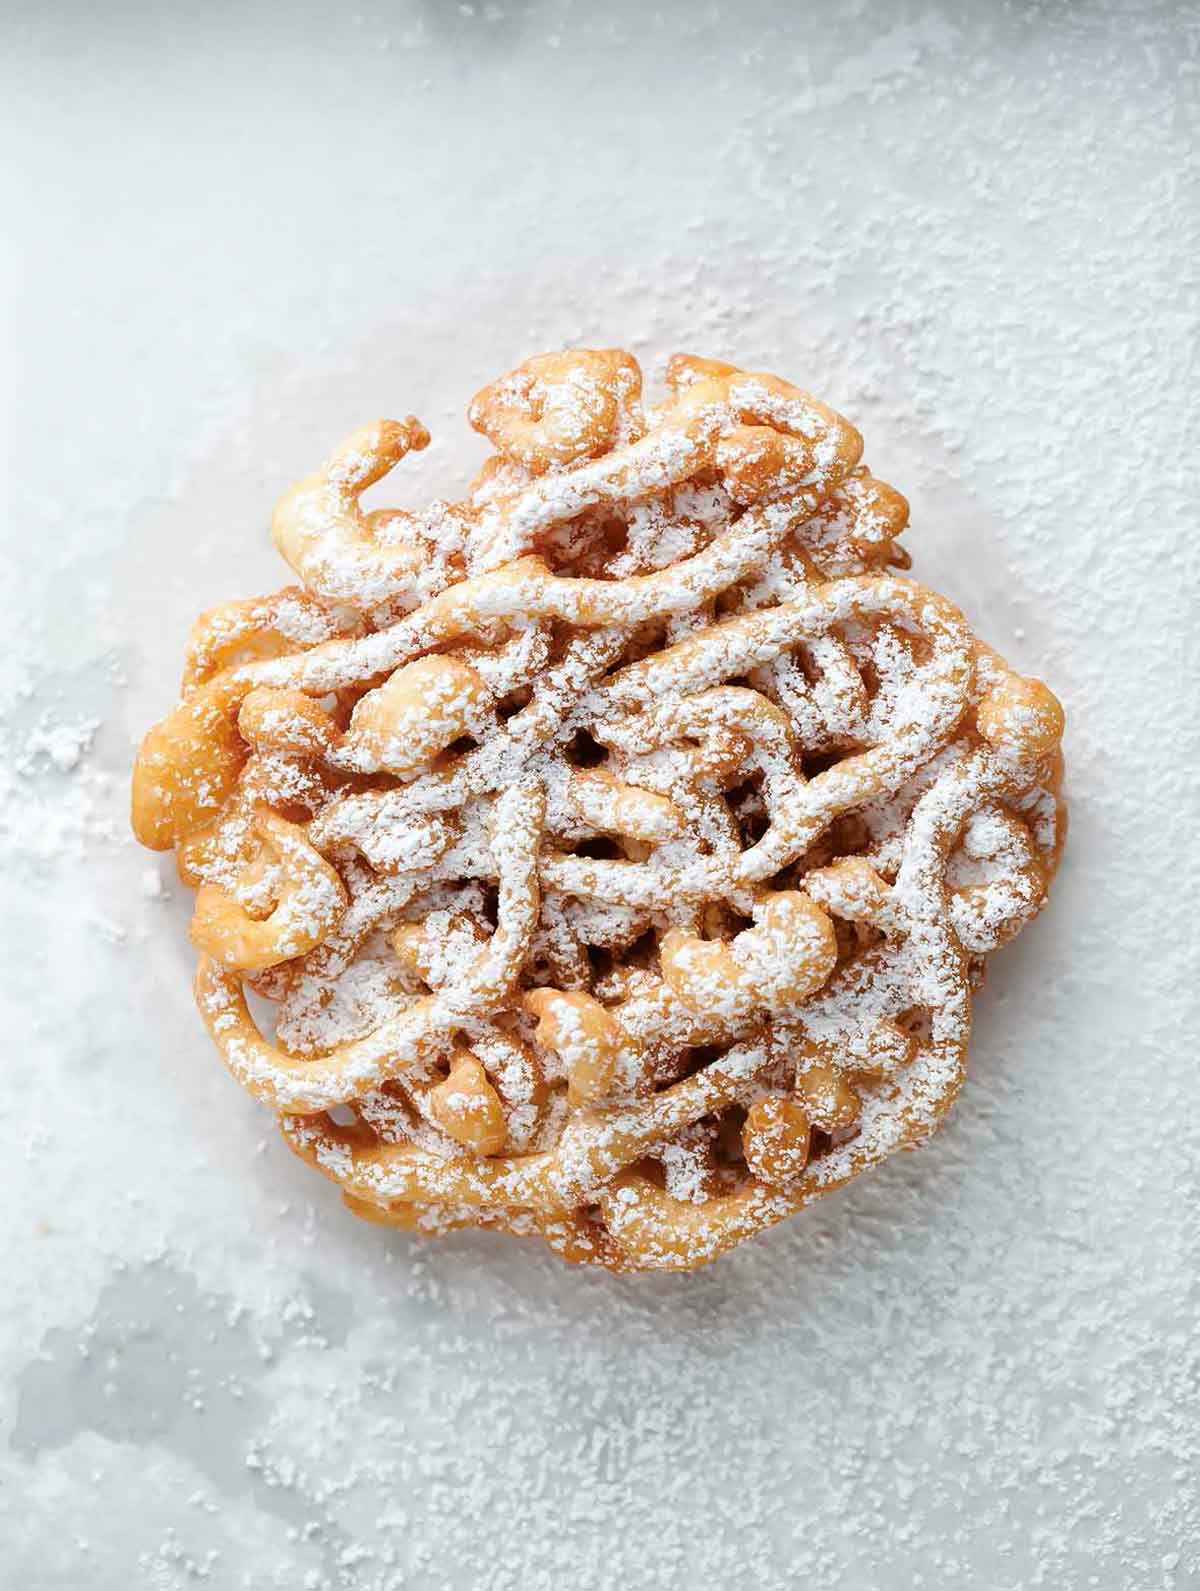 A fried mini funnel cake sprinkled with confectioners' sugar on a white background.